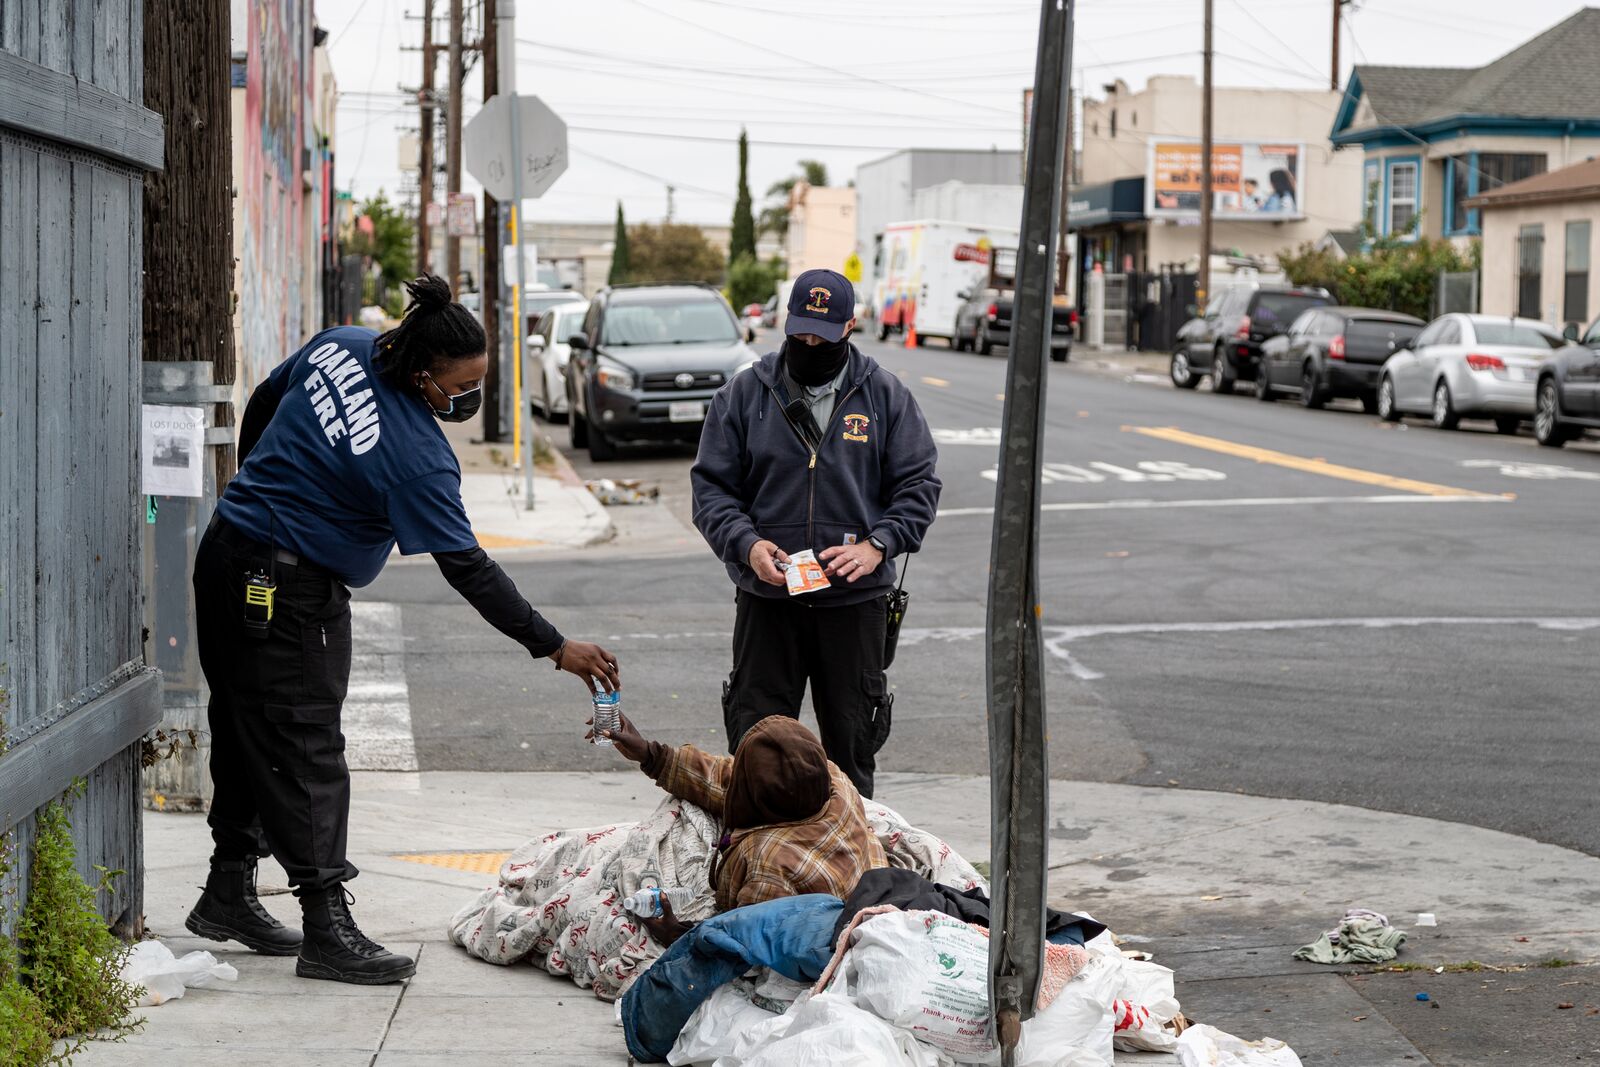 Two people wearing fire department shirts and wearing masks giving a water bottle to a man lying on the street wrapped in a blanket.